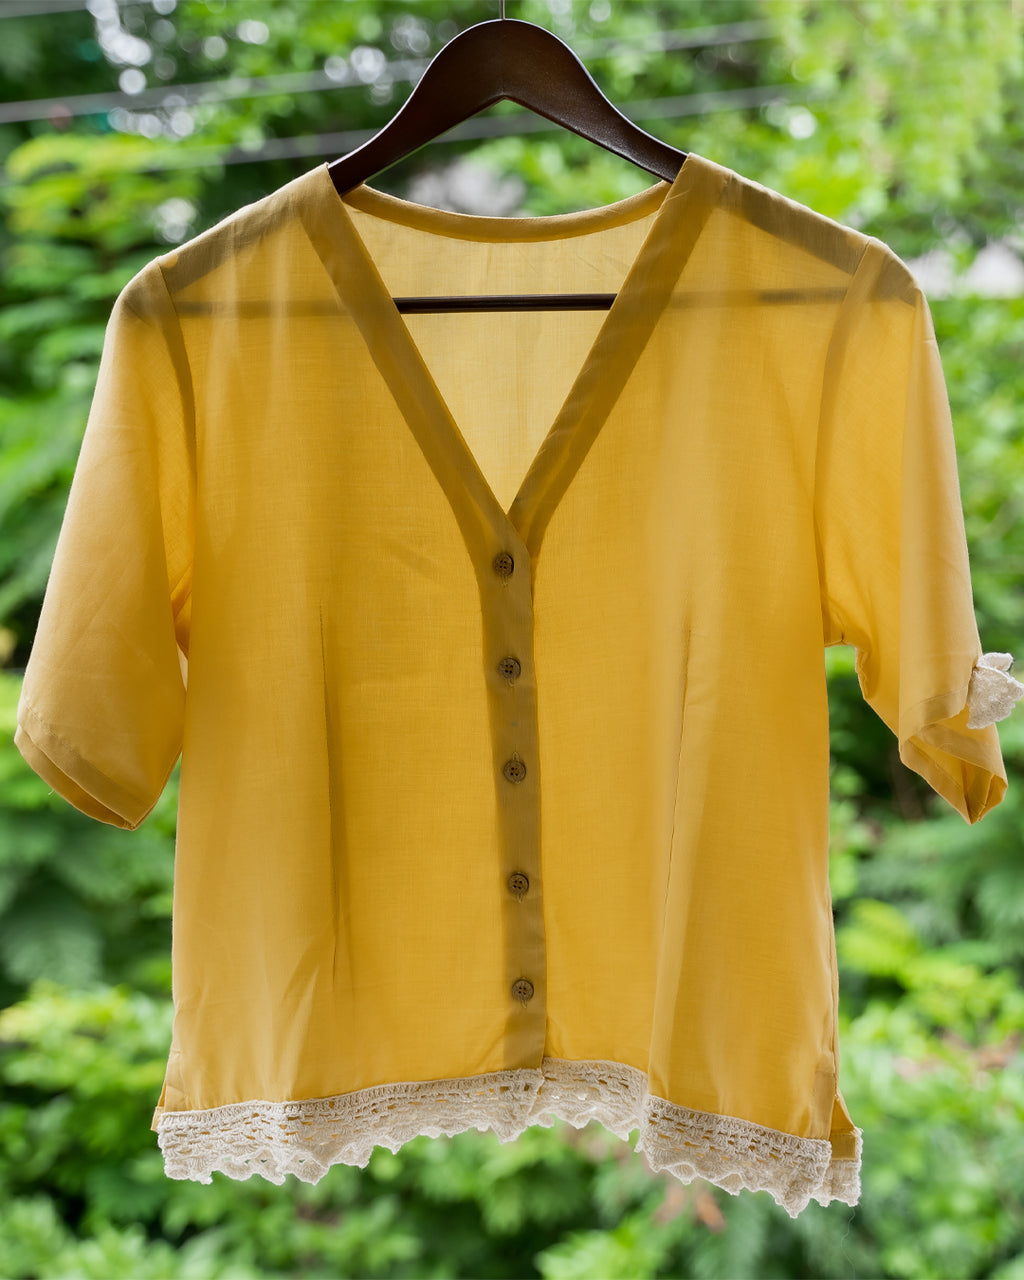 ColorPlay | Cotton Modal Blouse with Handmade Crochet Trim & Sleeves - Yellow